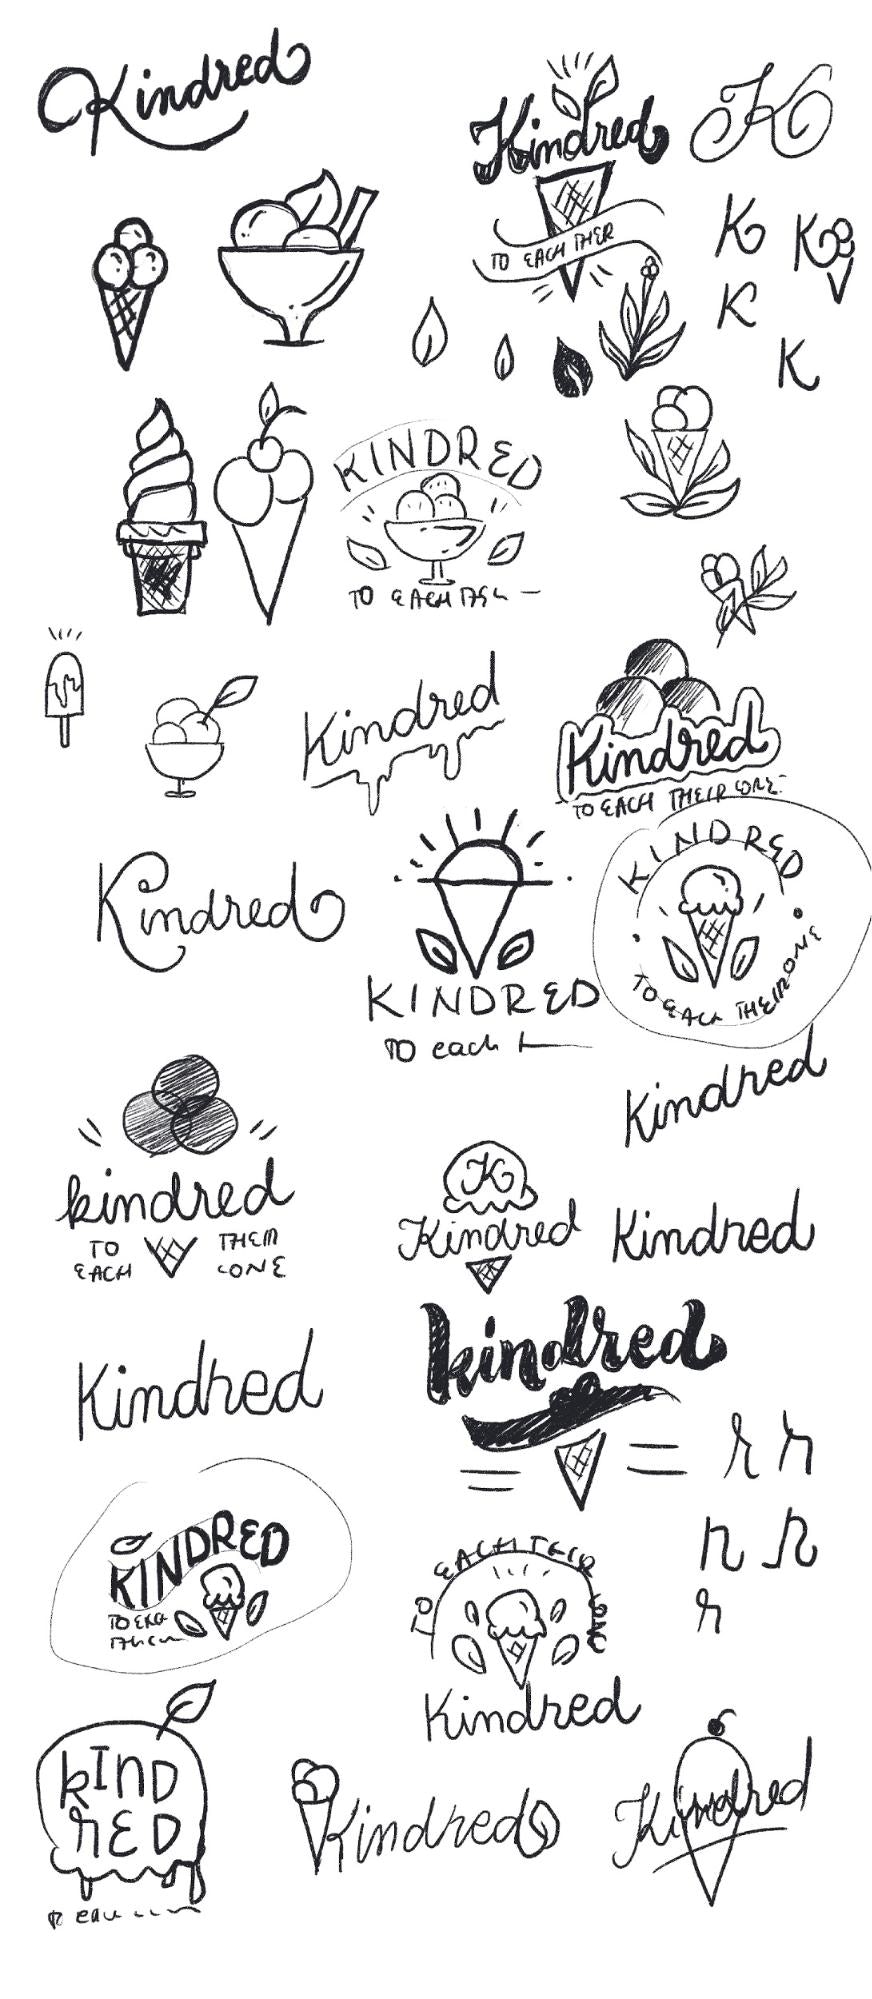 Kindred initial logo sketches